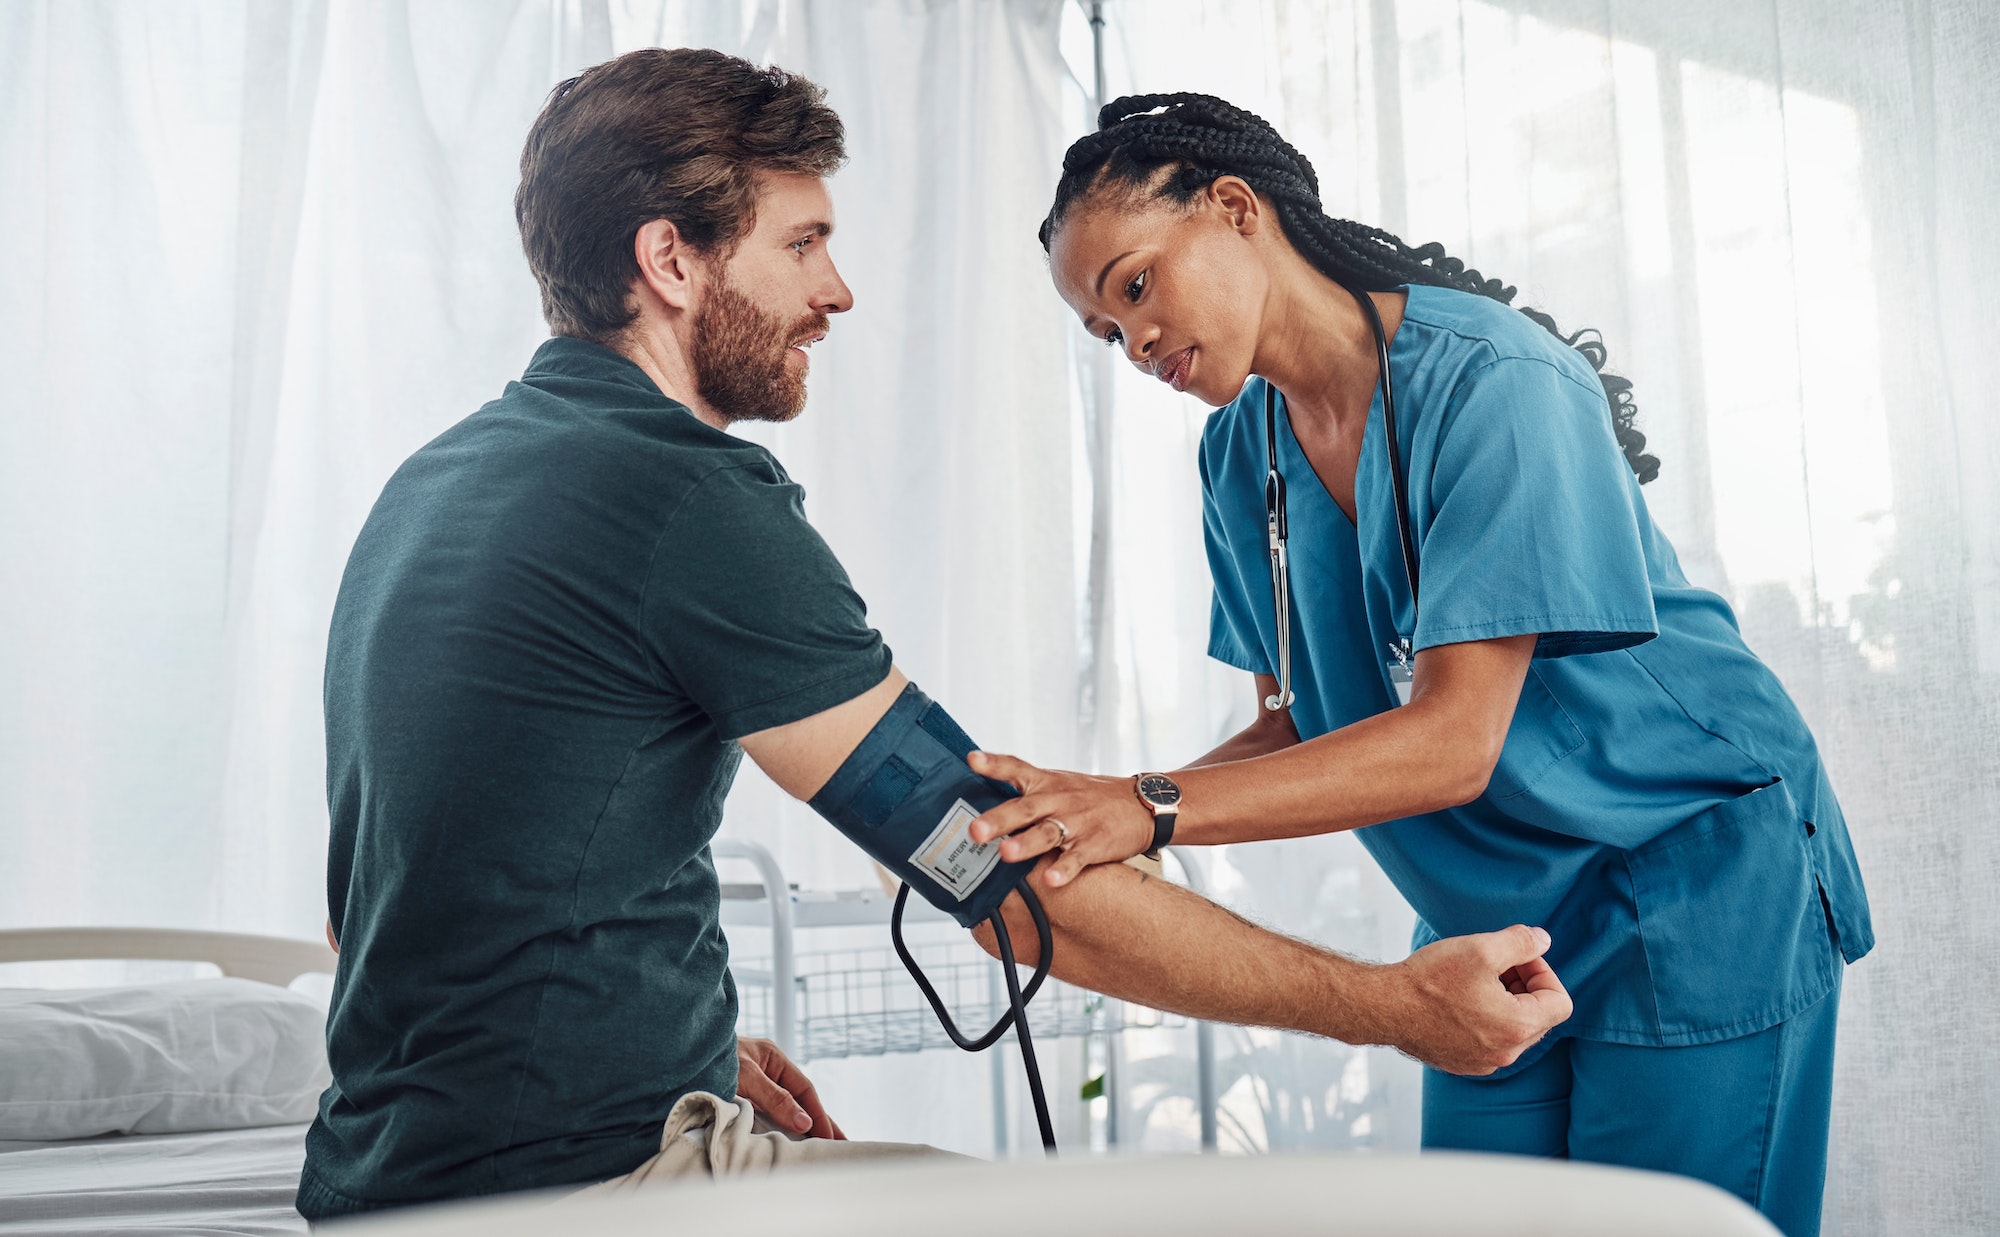 Nurse, doctor and man with blood pressure test in hospital for heart health or wellness. Healthcare